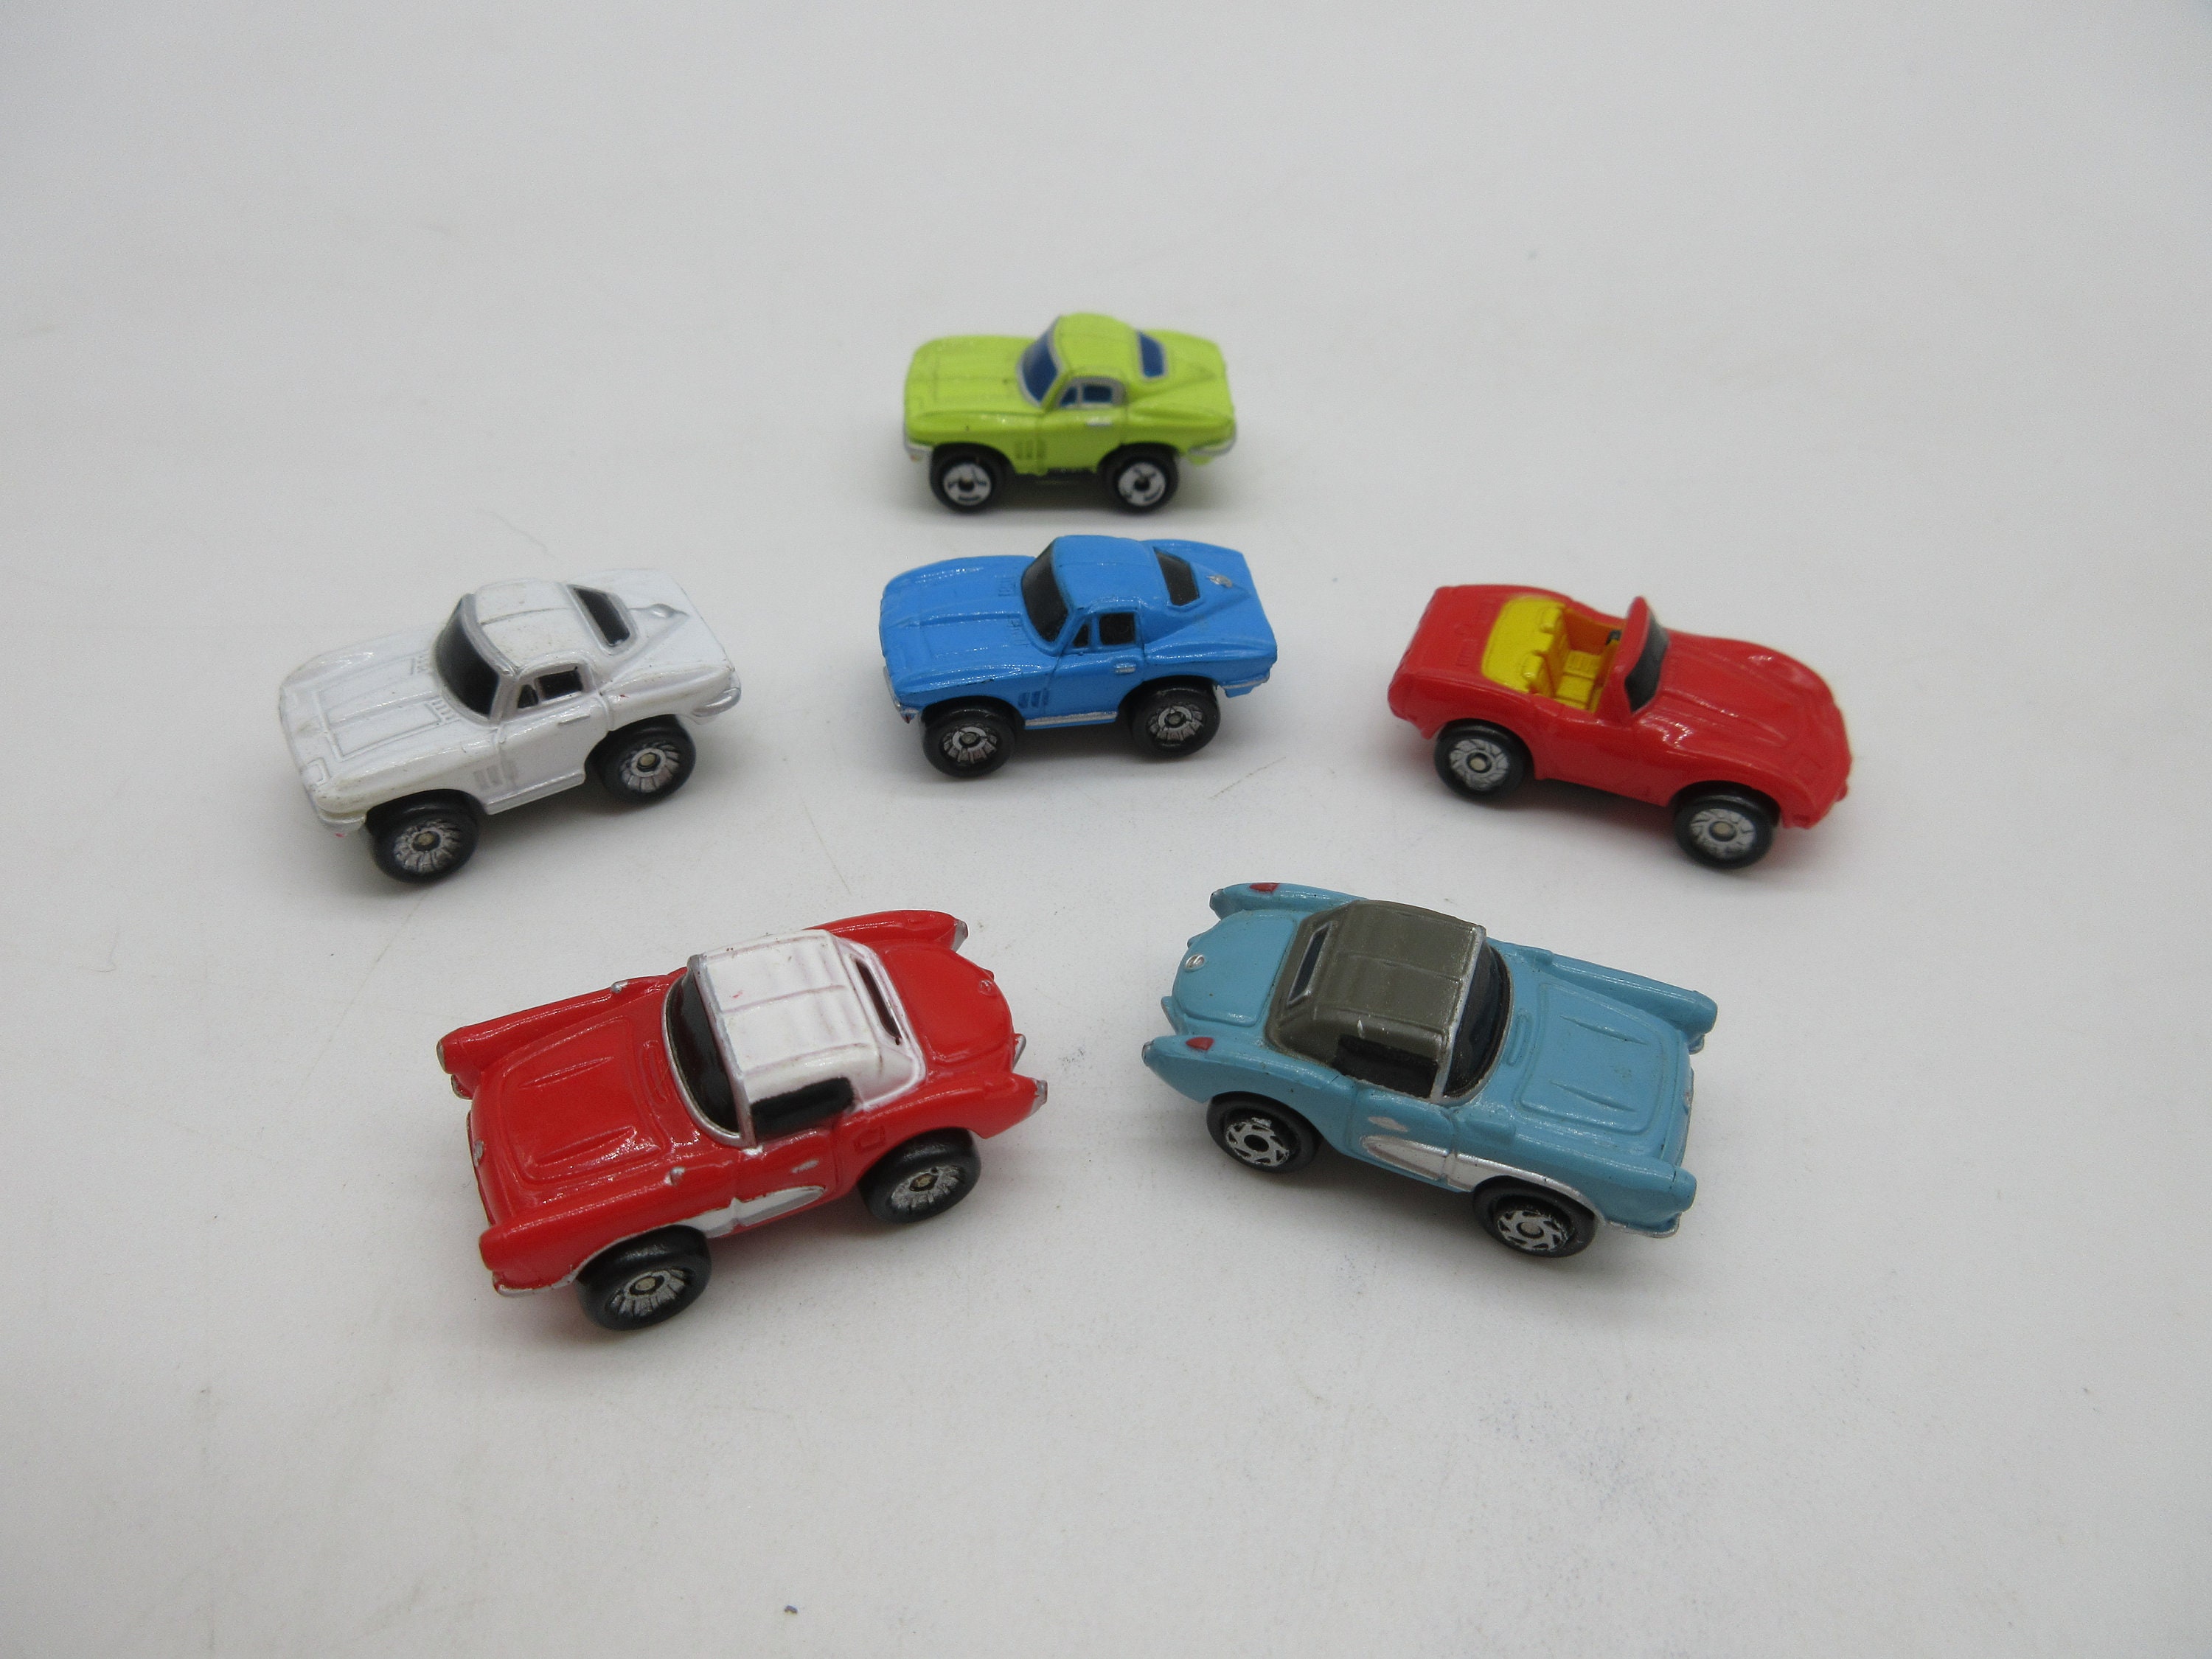 1986 Micro Machines: #35 Presidential collection